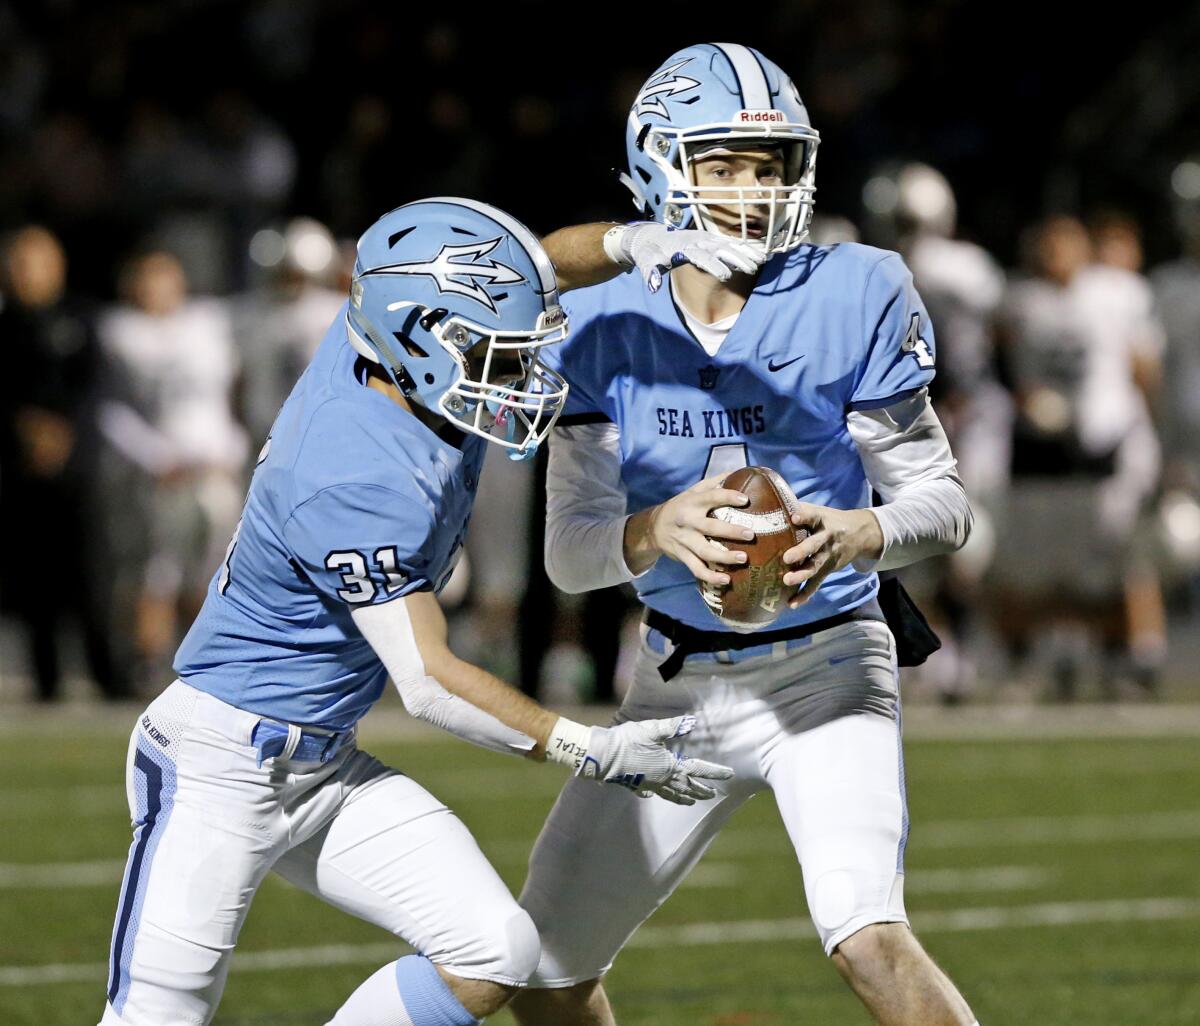 Corona del Mar's Ethan Garbers, right, fakes the handoff to Riley Binnquist in the CIF State Southern California Regional Division 1-A Bowl Game against Oceanside on Dec. 7 at Newport Harbor High.